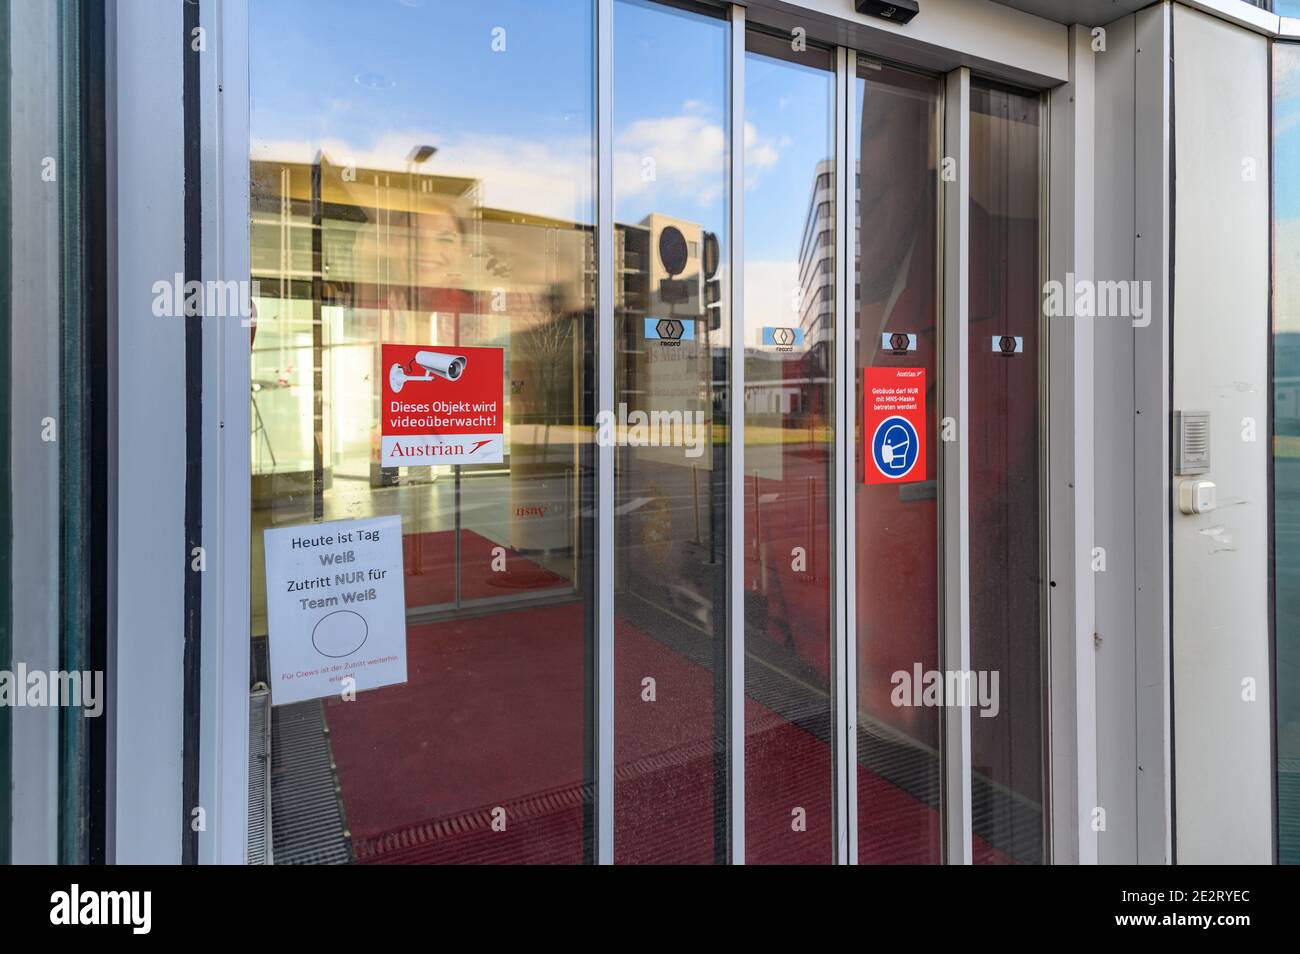 schwechat, austria, 13 jan 2021, entrance of an office of the austrian airlines at the vienna international airport during the covid-19 lockdown Stock Photo